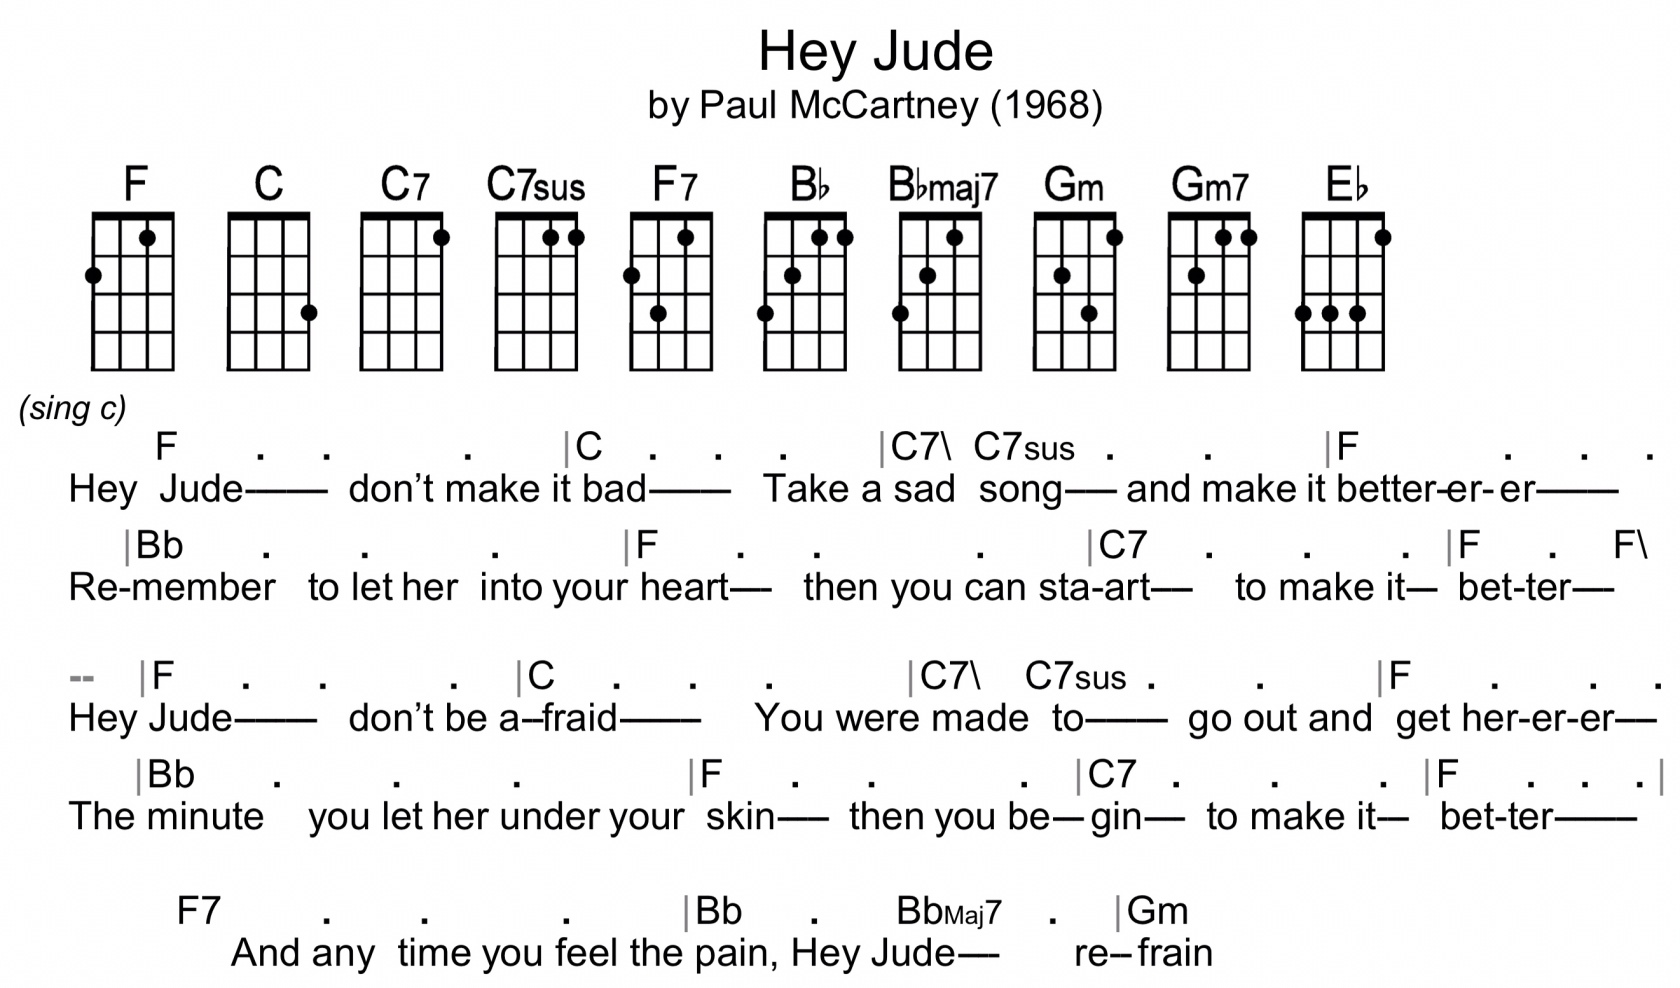 By 9 pm, the ten chords in "Hey Jude" don’t look formidable anymo...